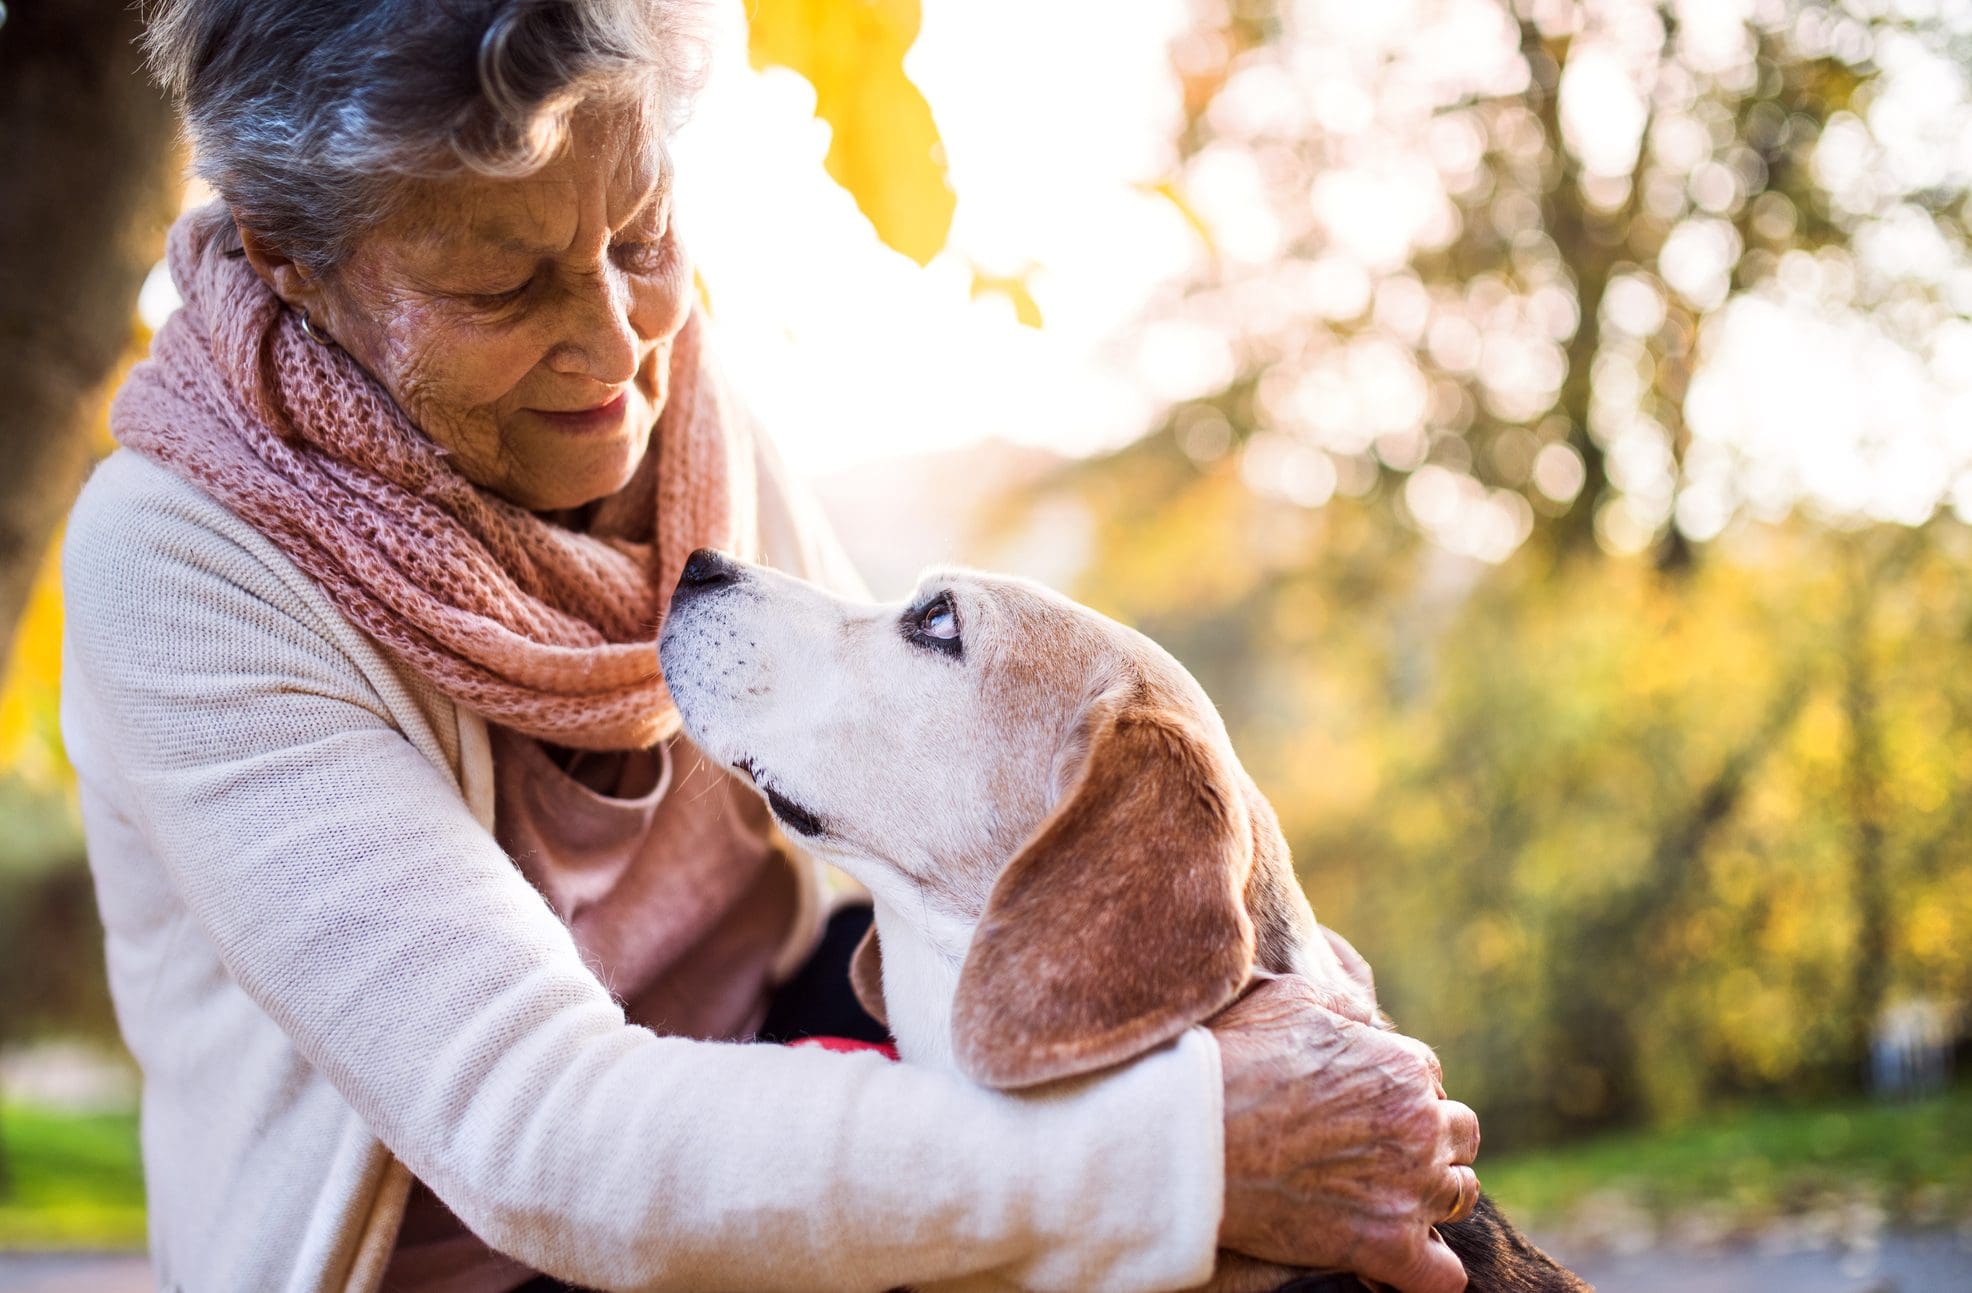 An elderly woman with dog in autumn nature.